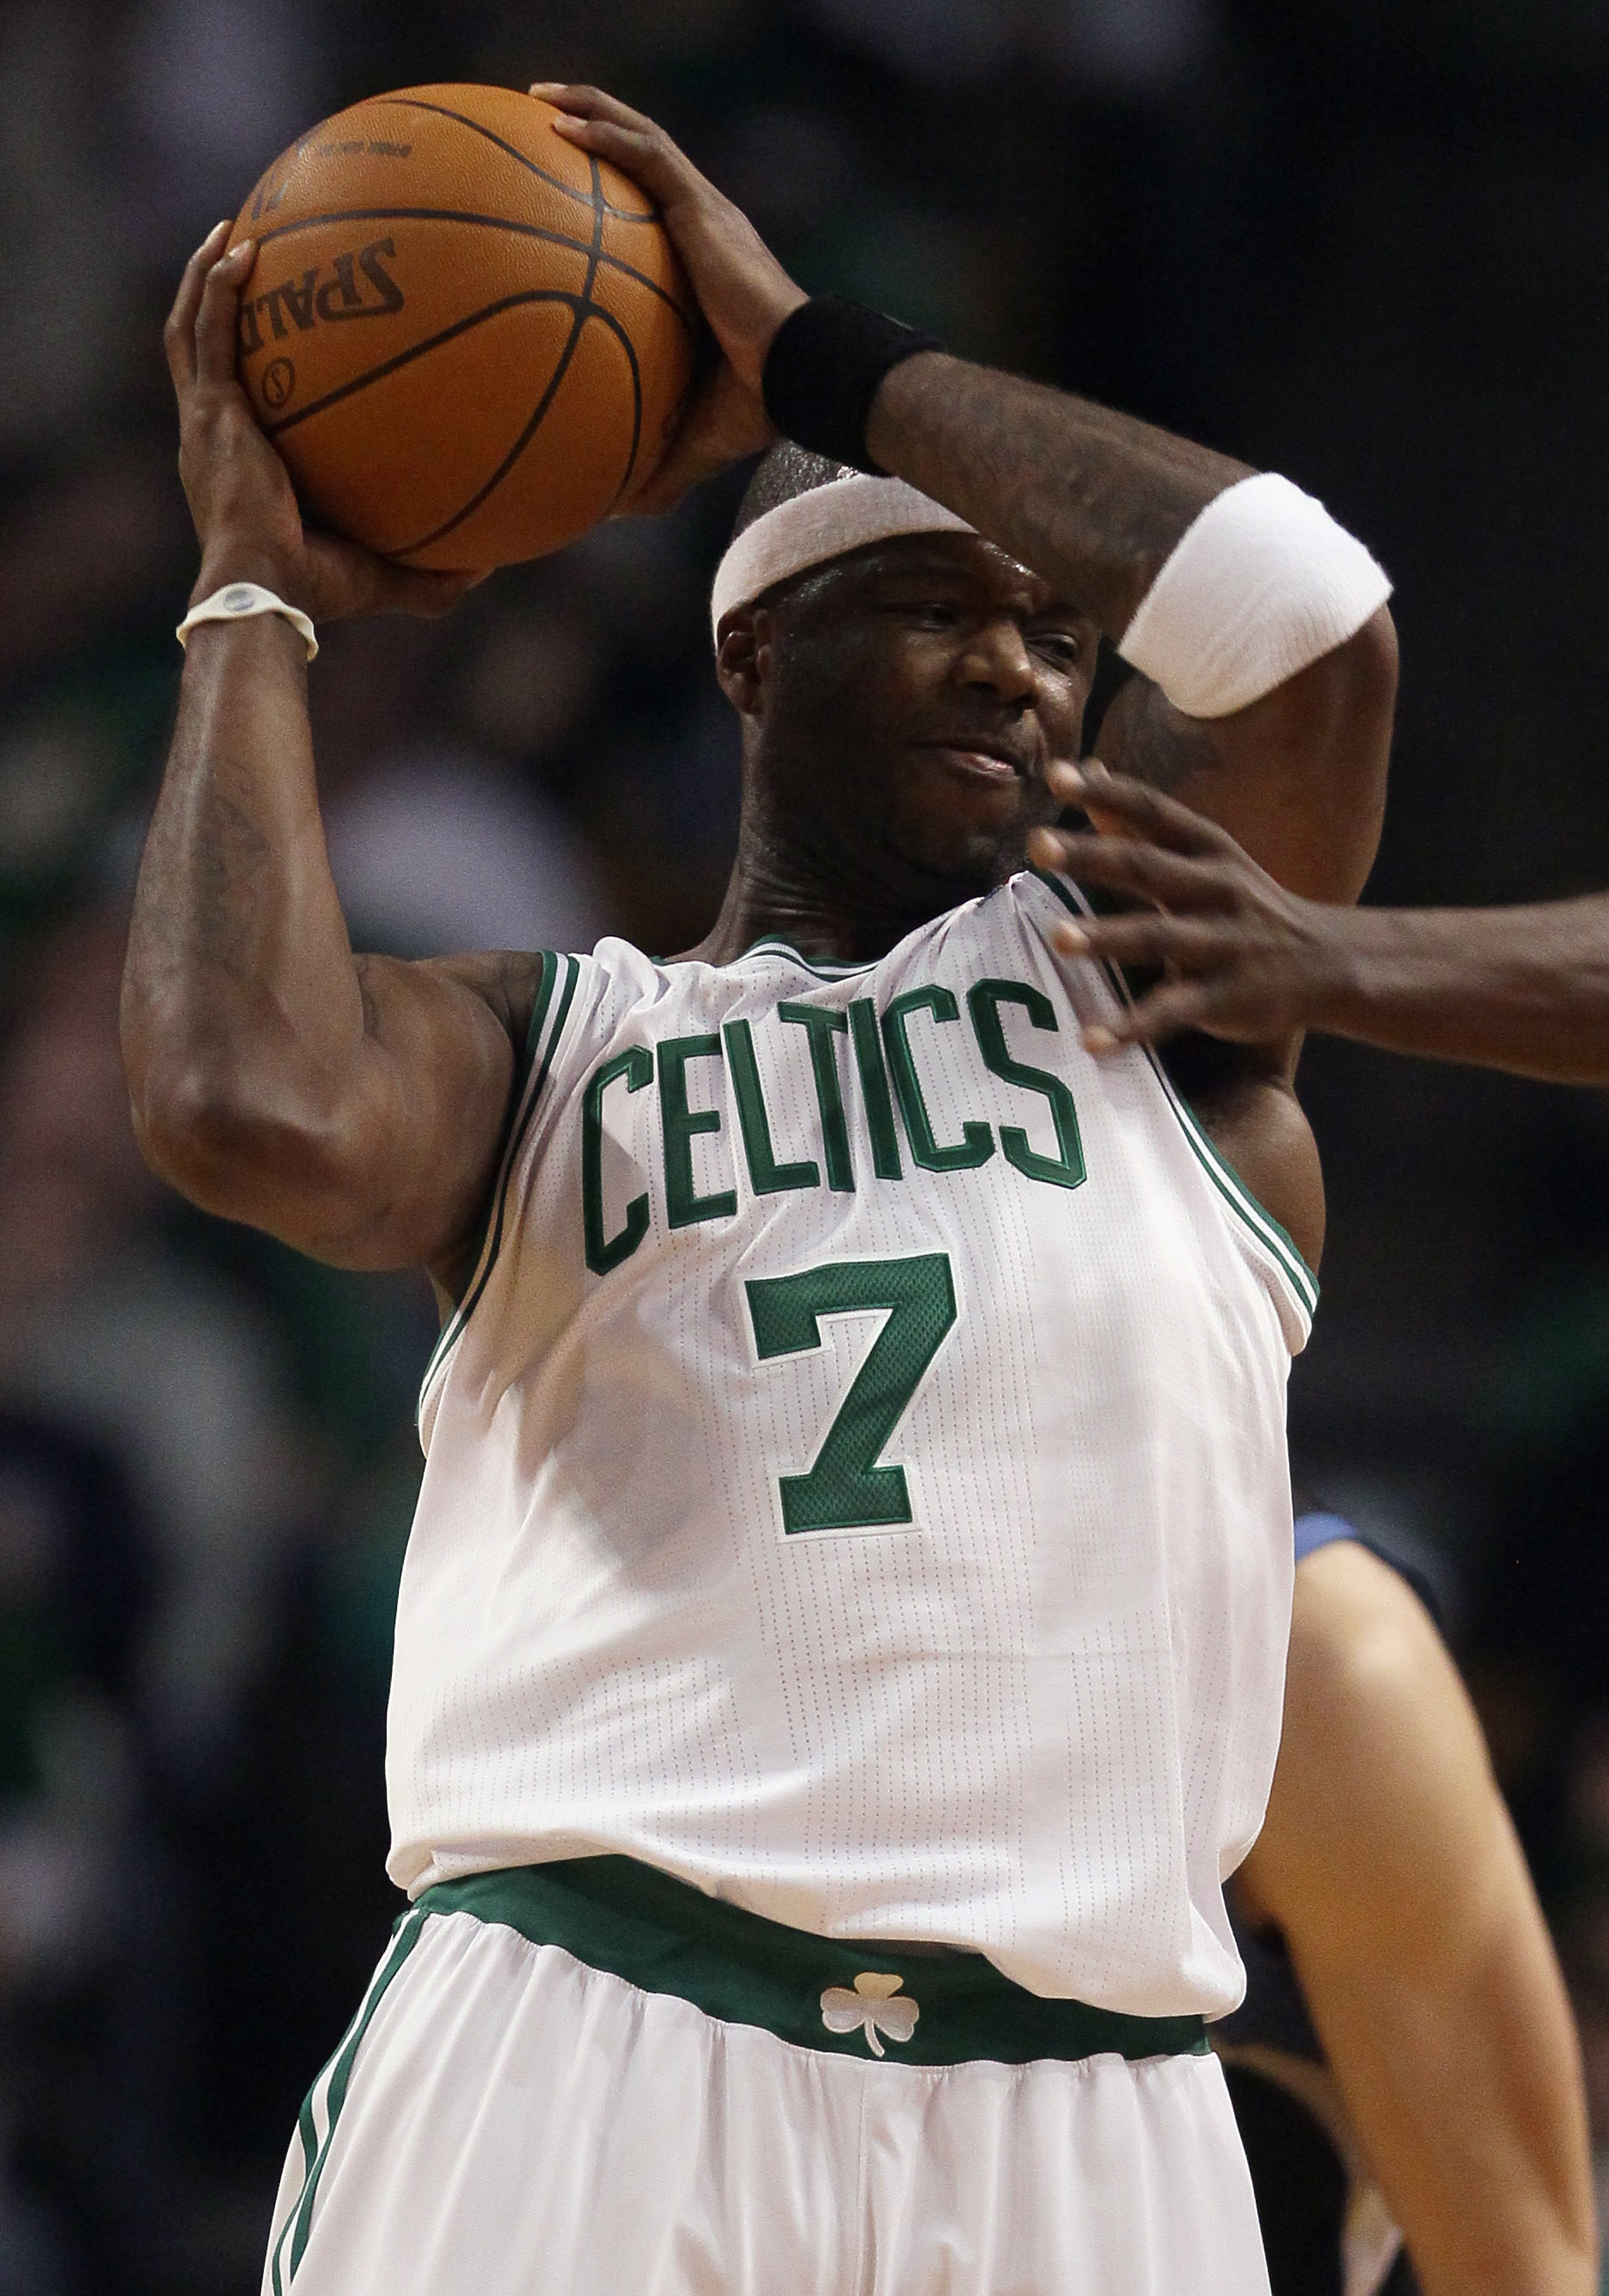 BOSTON, MA - JANUARY 03:  Jermaine O'Neal #7 of the Boston Celtics tries to keep the ball as he is swatted by a memeber of the Minnesota Timberwolves on January 3, 2011 at the TD Garden in Boston, Massachusetts. The Celtics defeated the Timberwolves 96-93